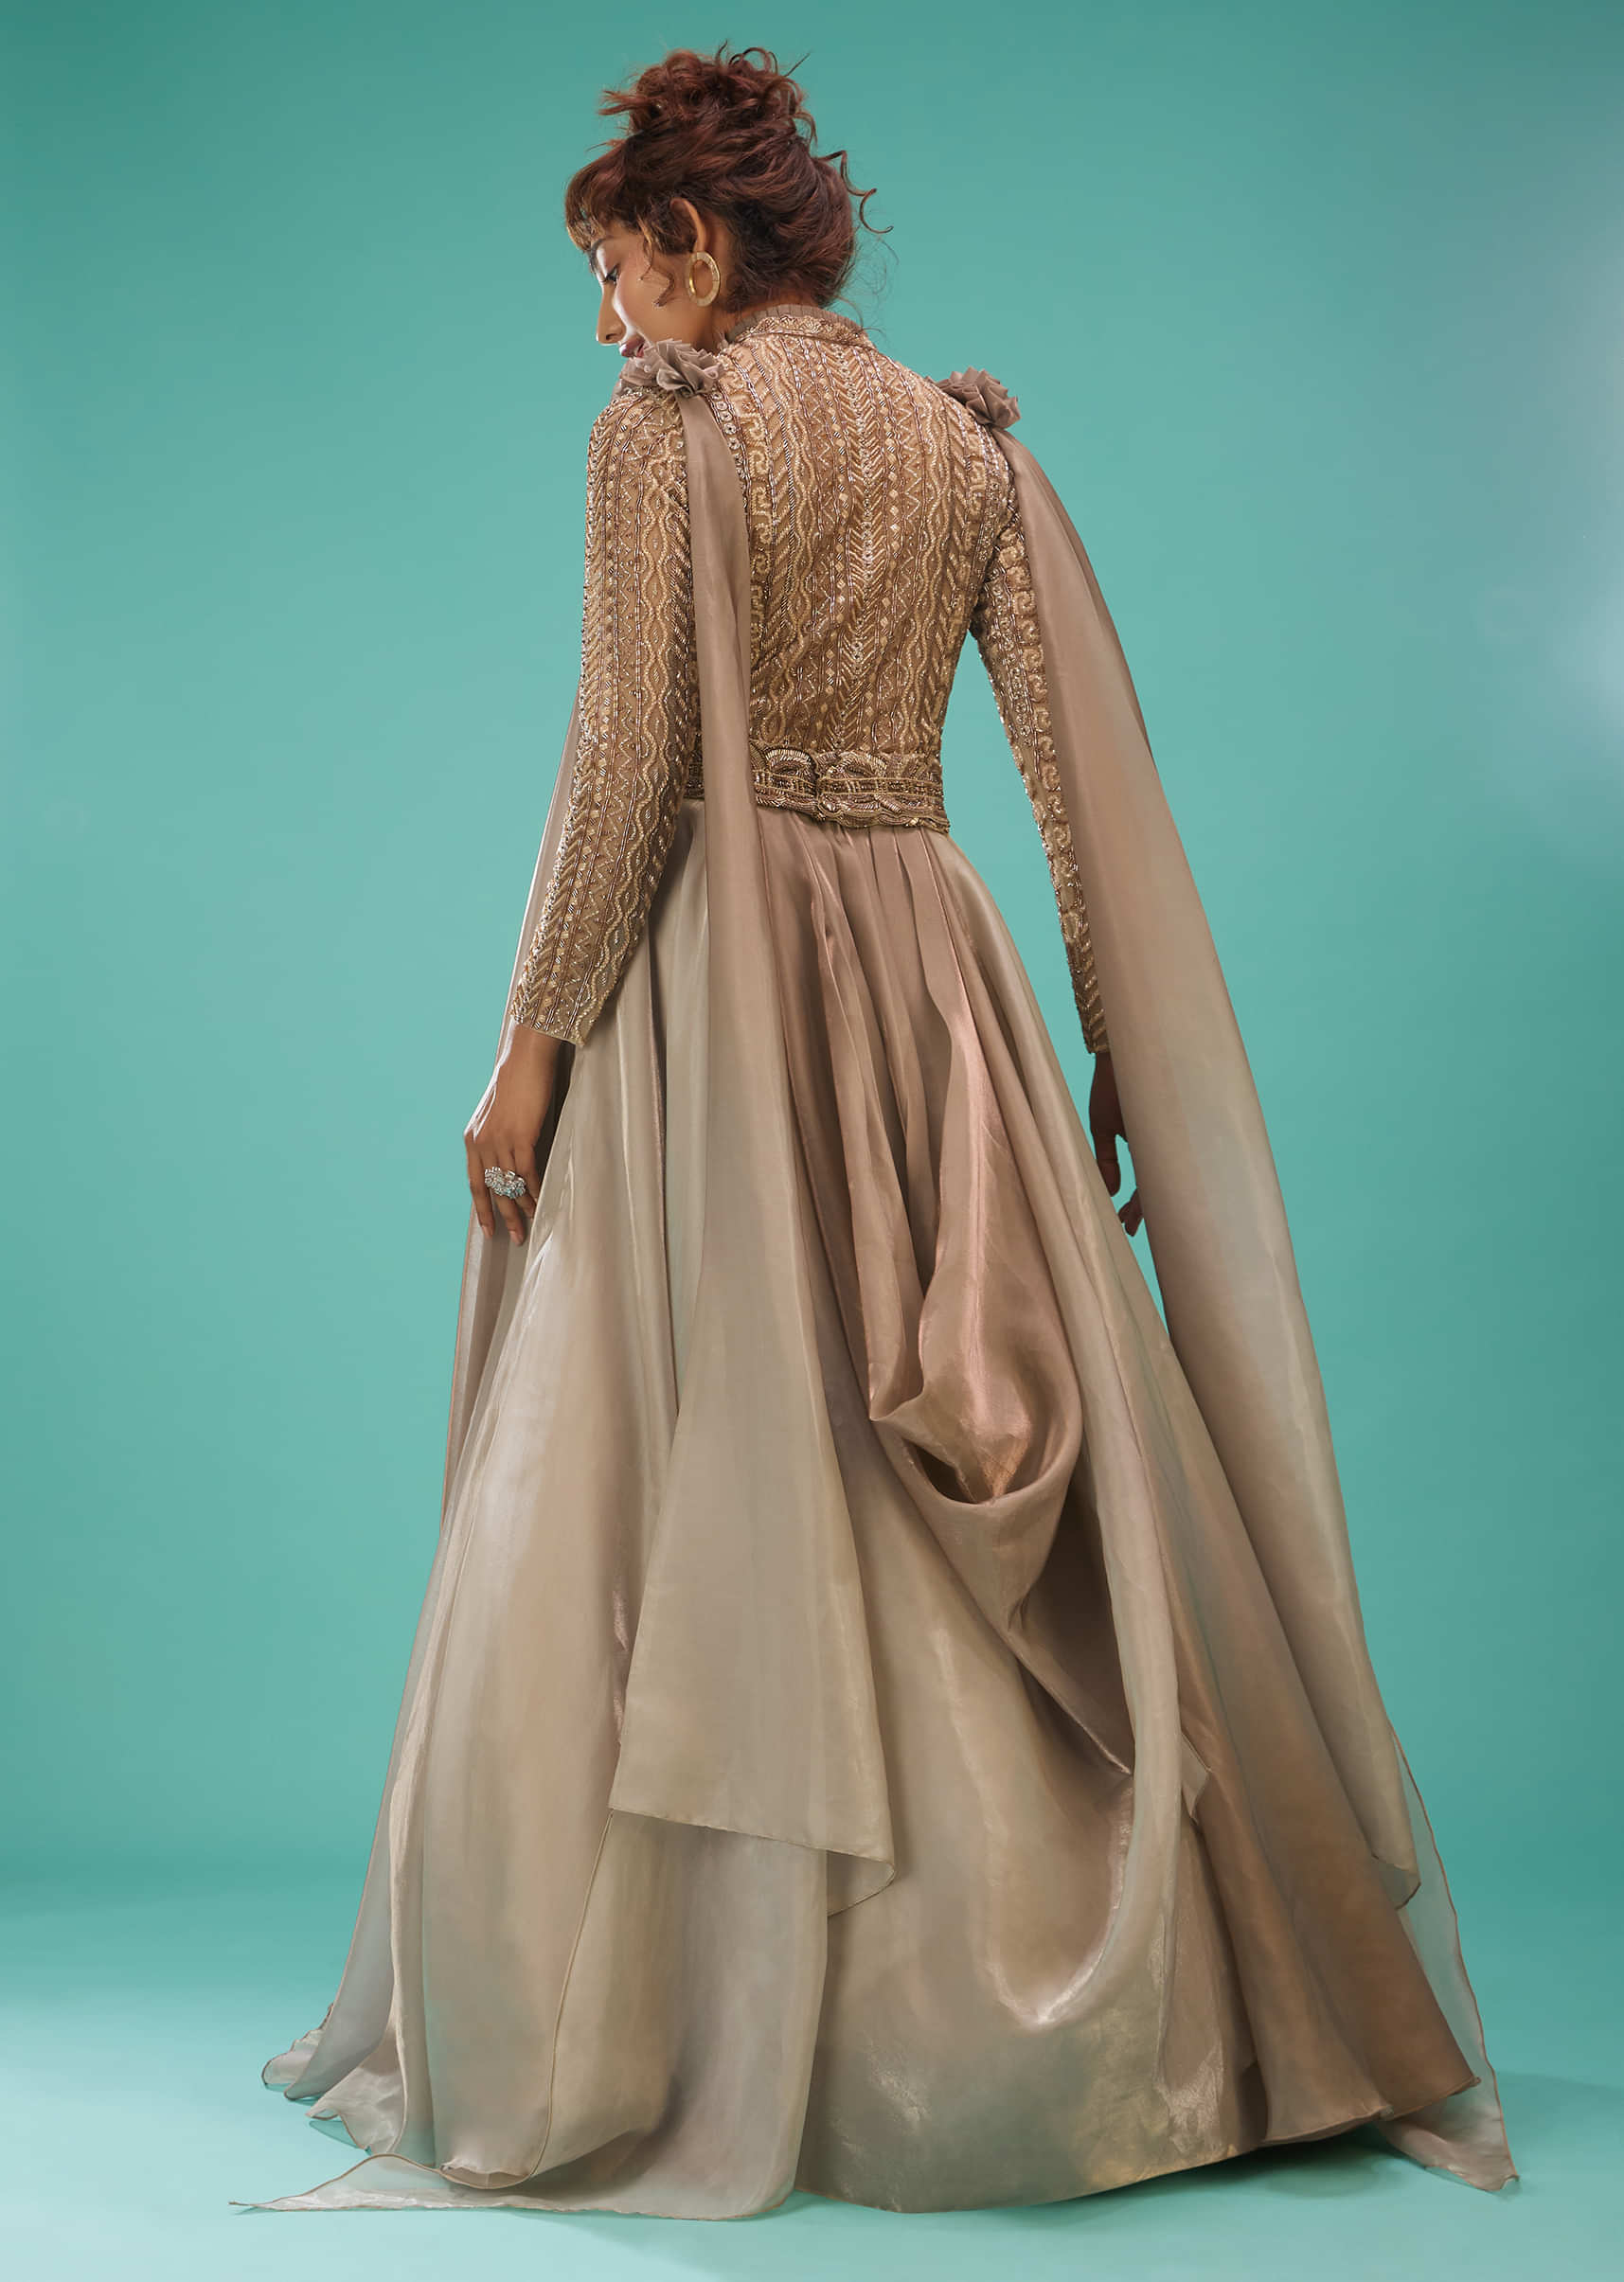 Mocha Brown Embroidered Ball Gown In Organza With A Gradient Shade Of Silver Lining